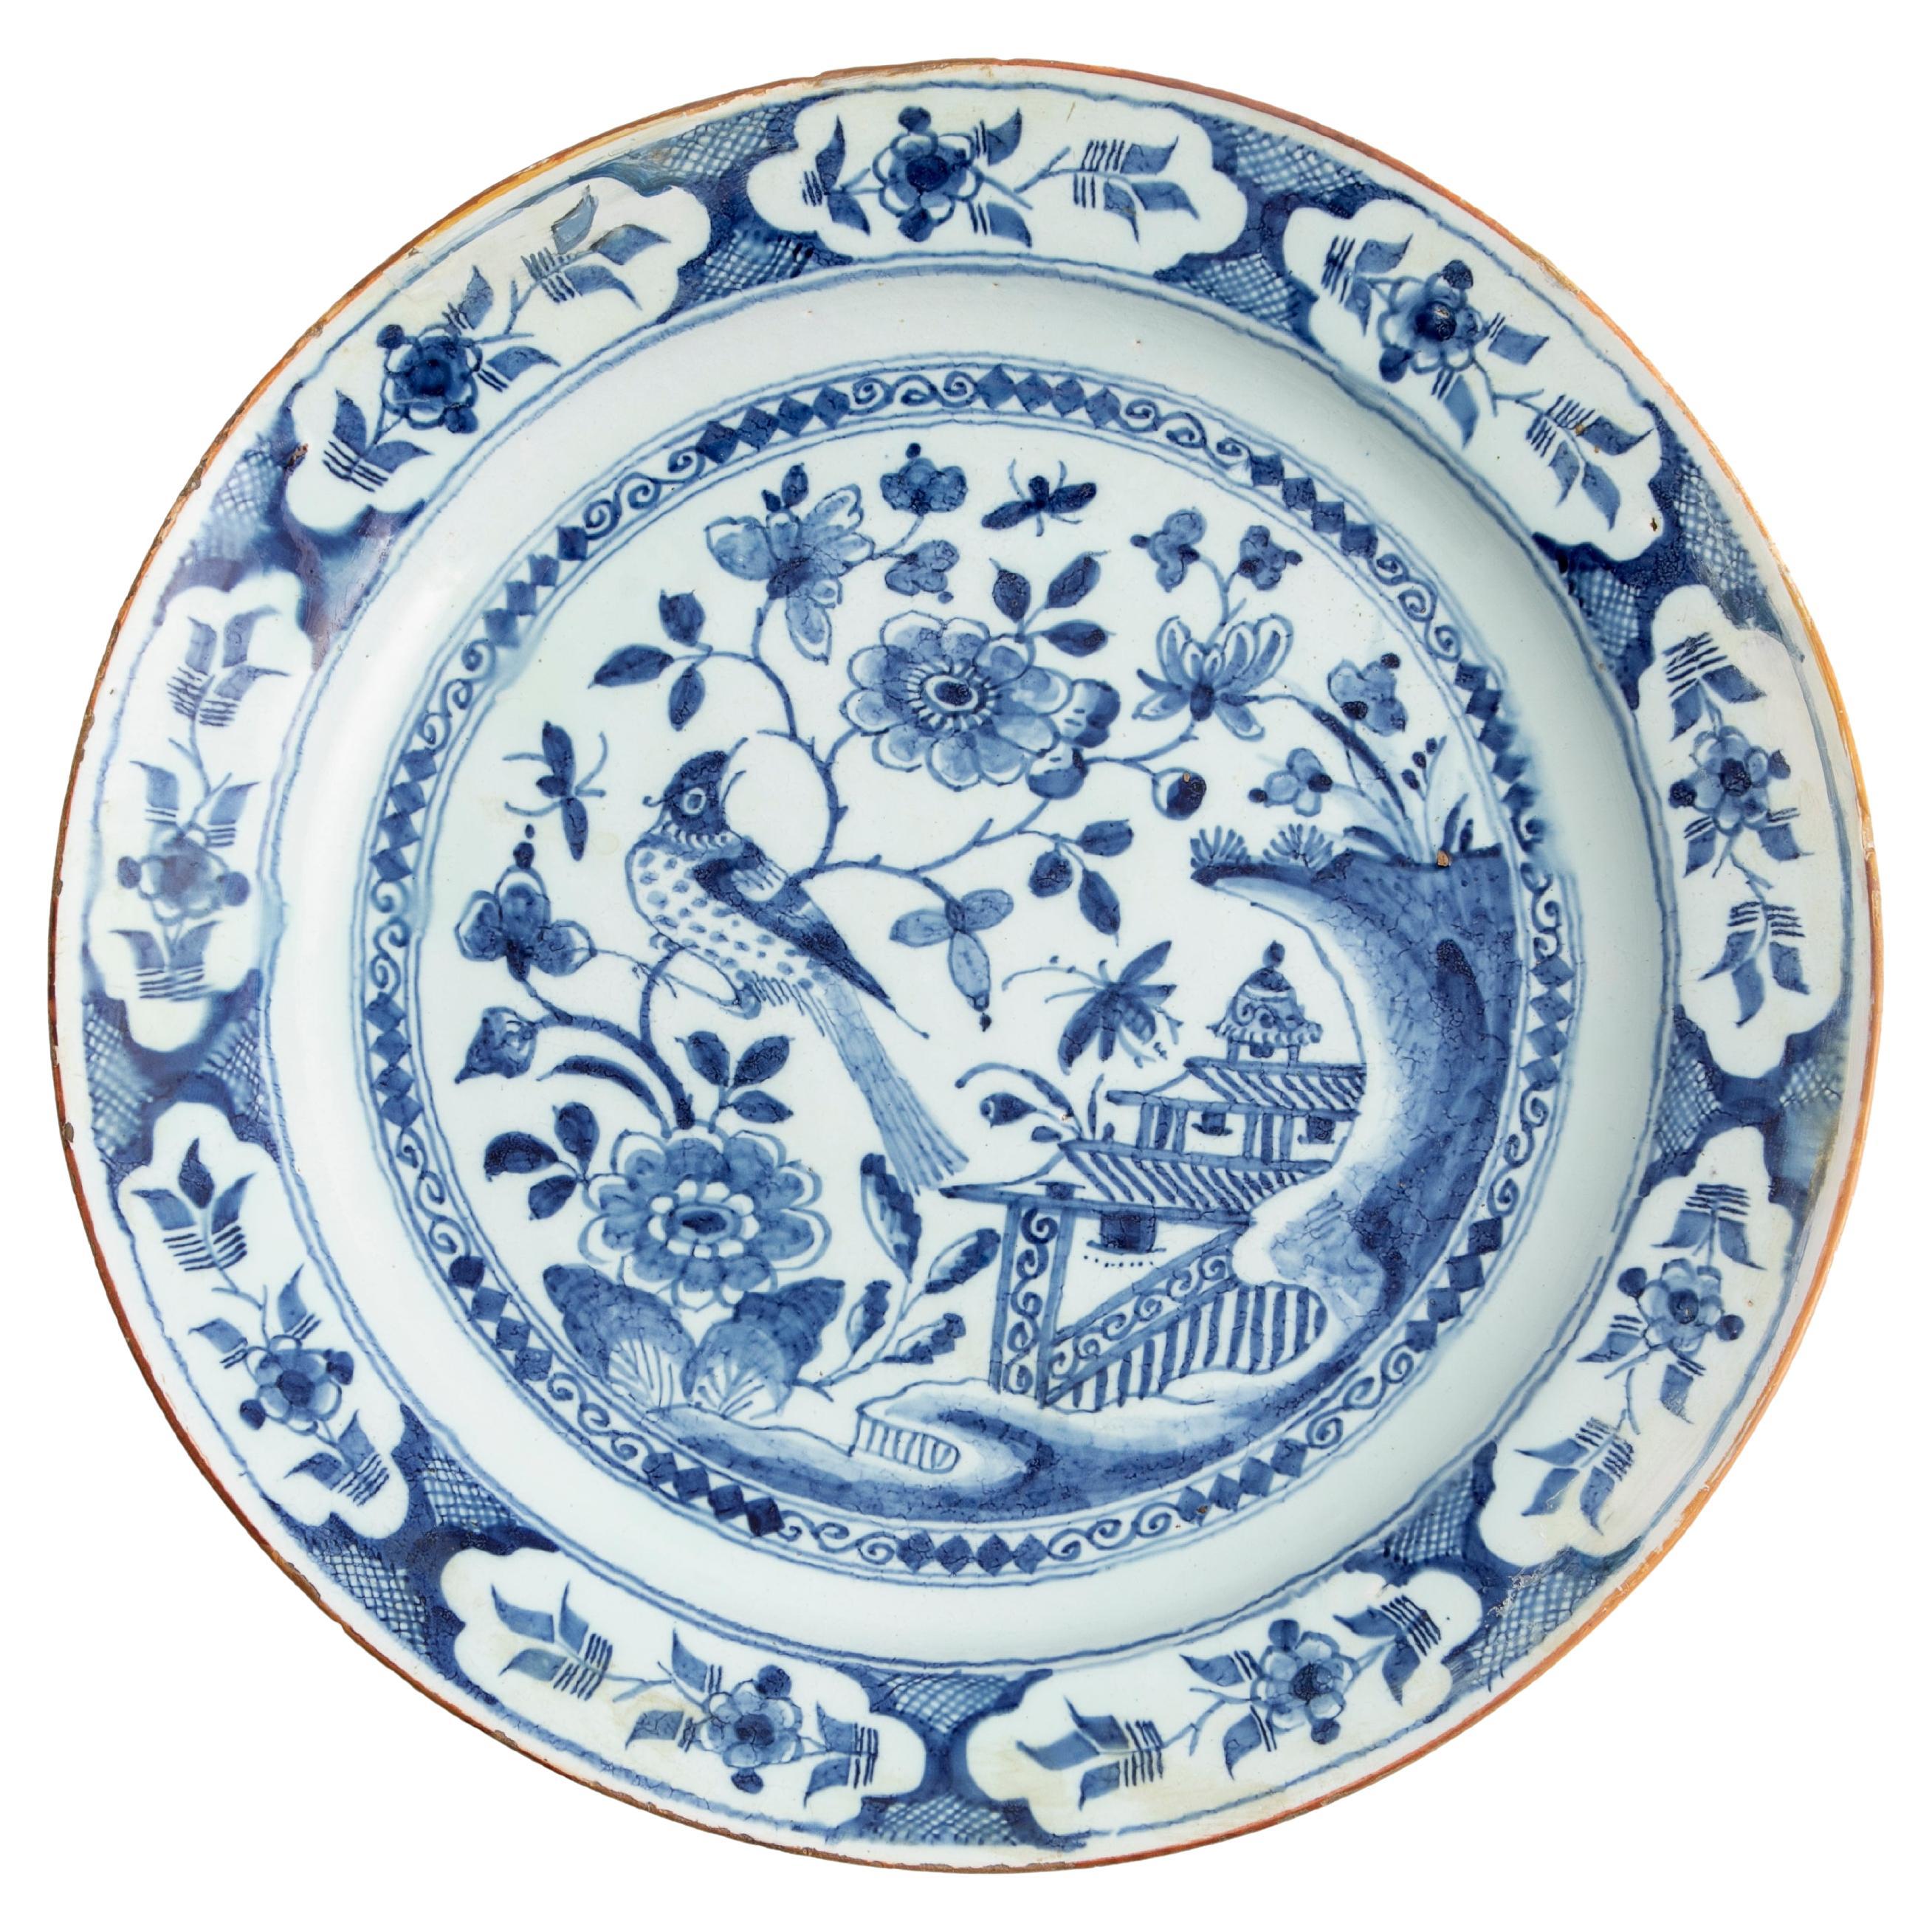 18th Century Dutch Delft Plate with Chinoiseries Decoration